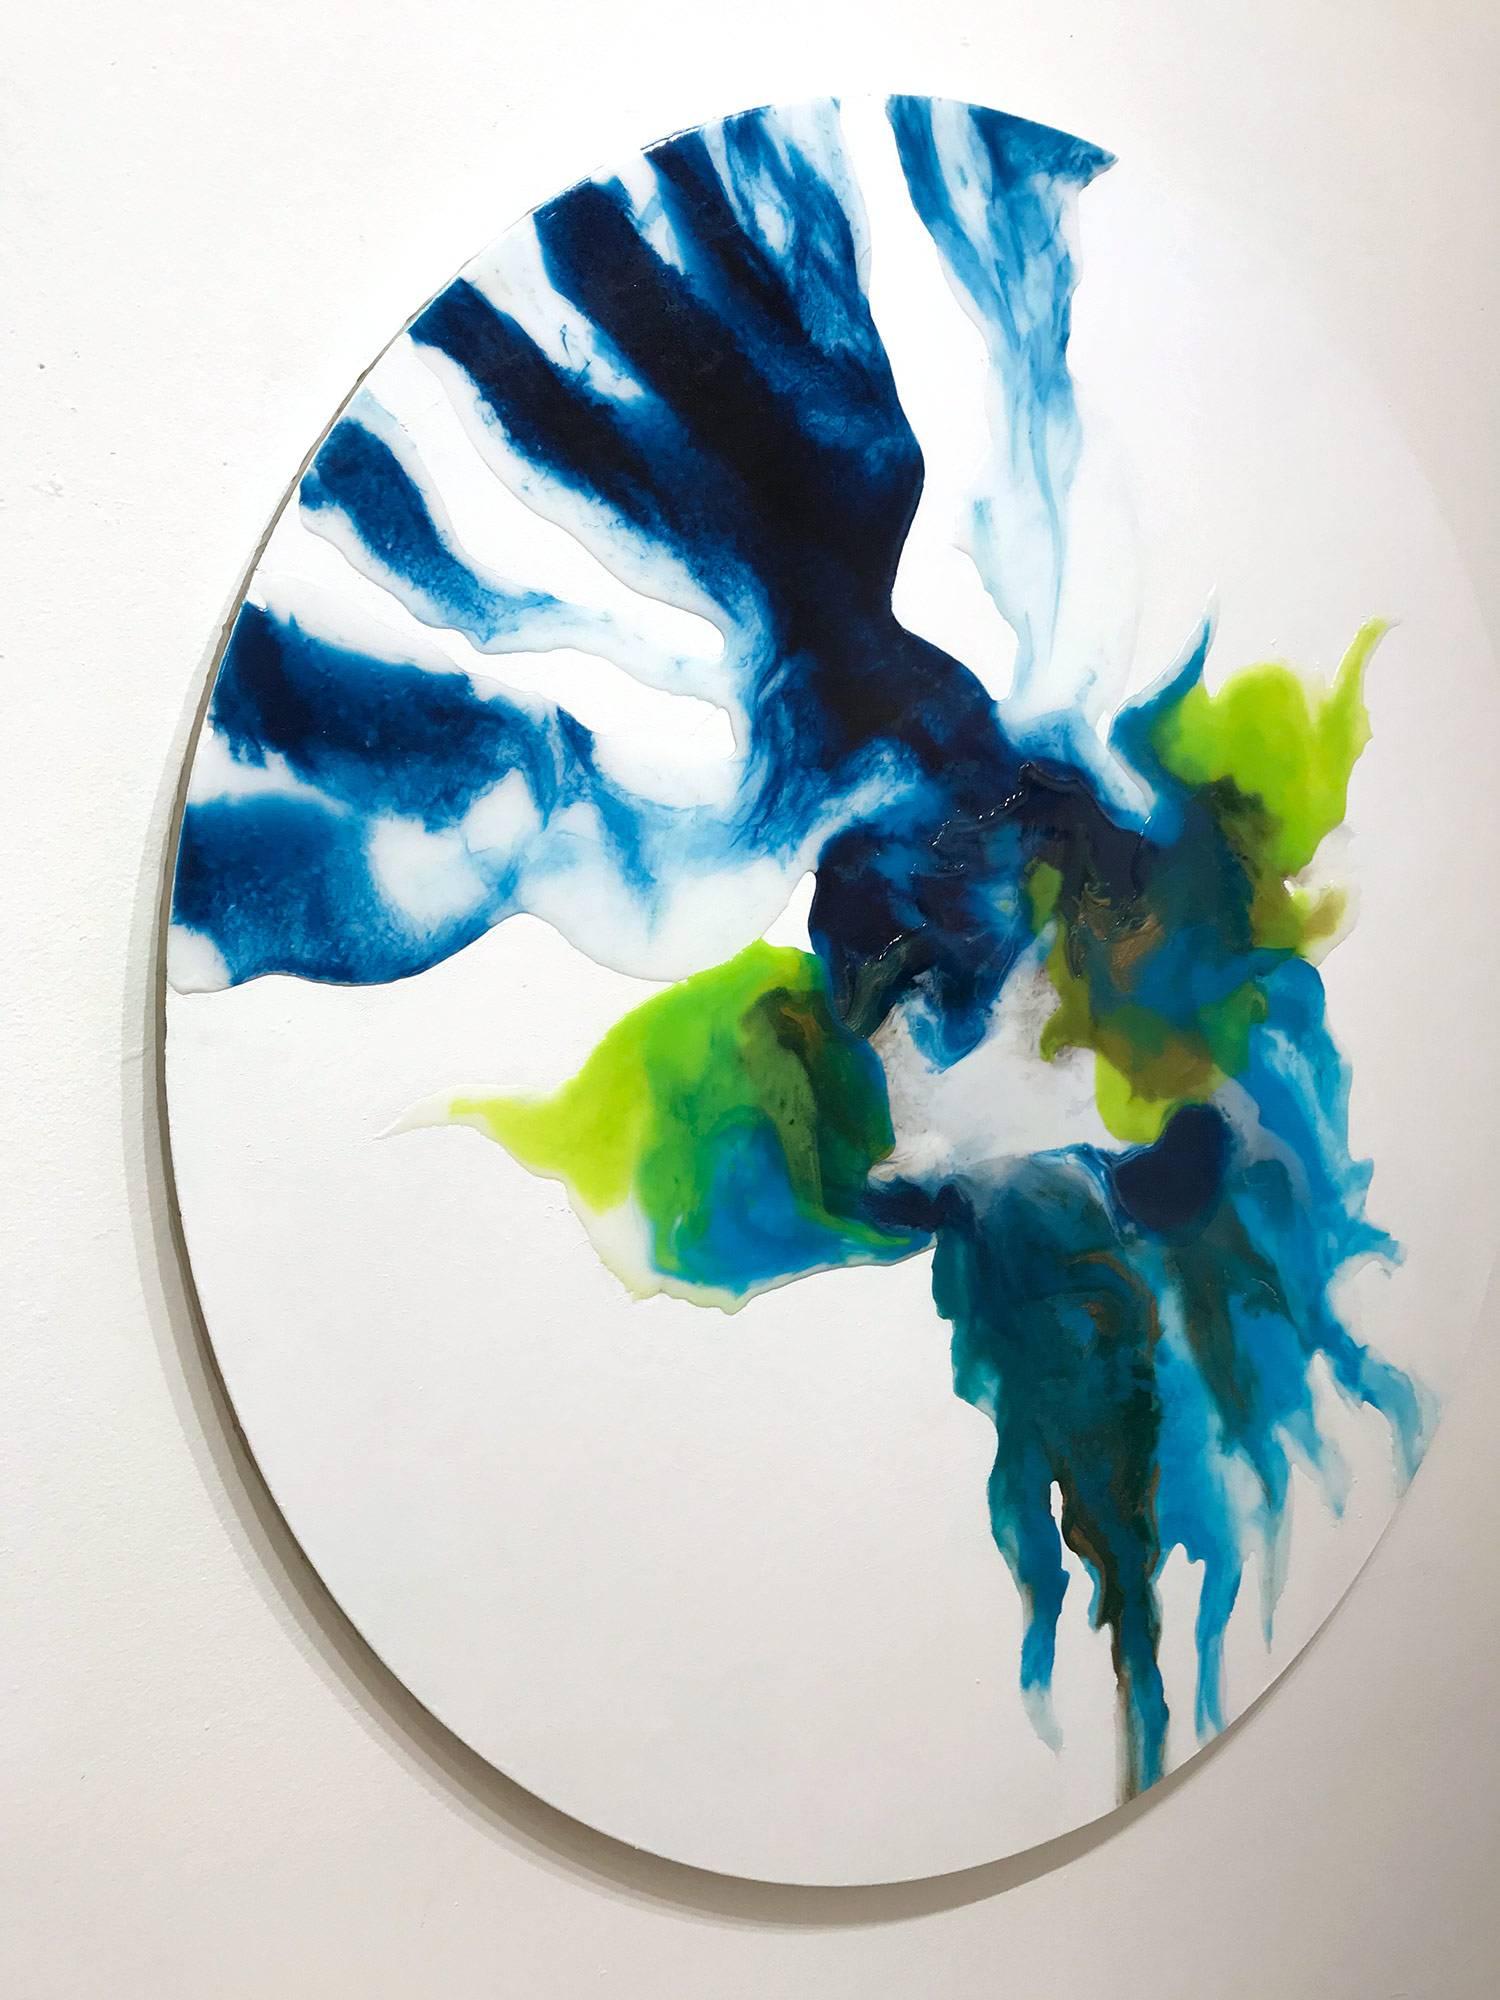 A dramatic circular mixed media on canvas painting with wonderful details and pops of cobalt blue and lime green. We are enamored by the stark contrast, as the shape of the paint takes on unique and stunning forms. A wonderfully colorful and strong